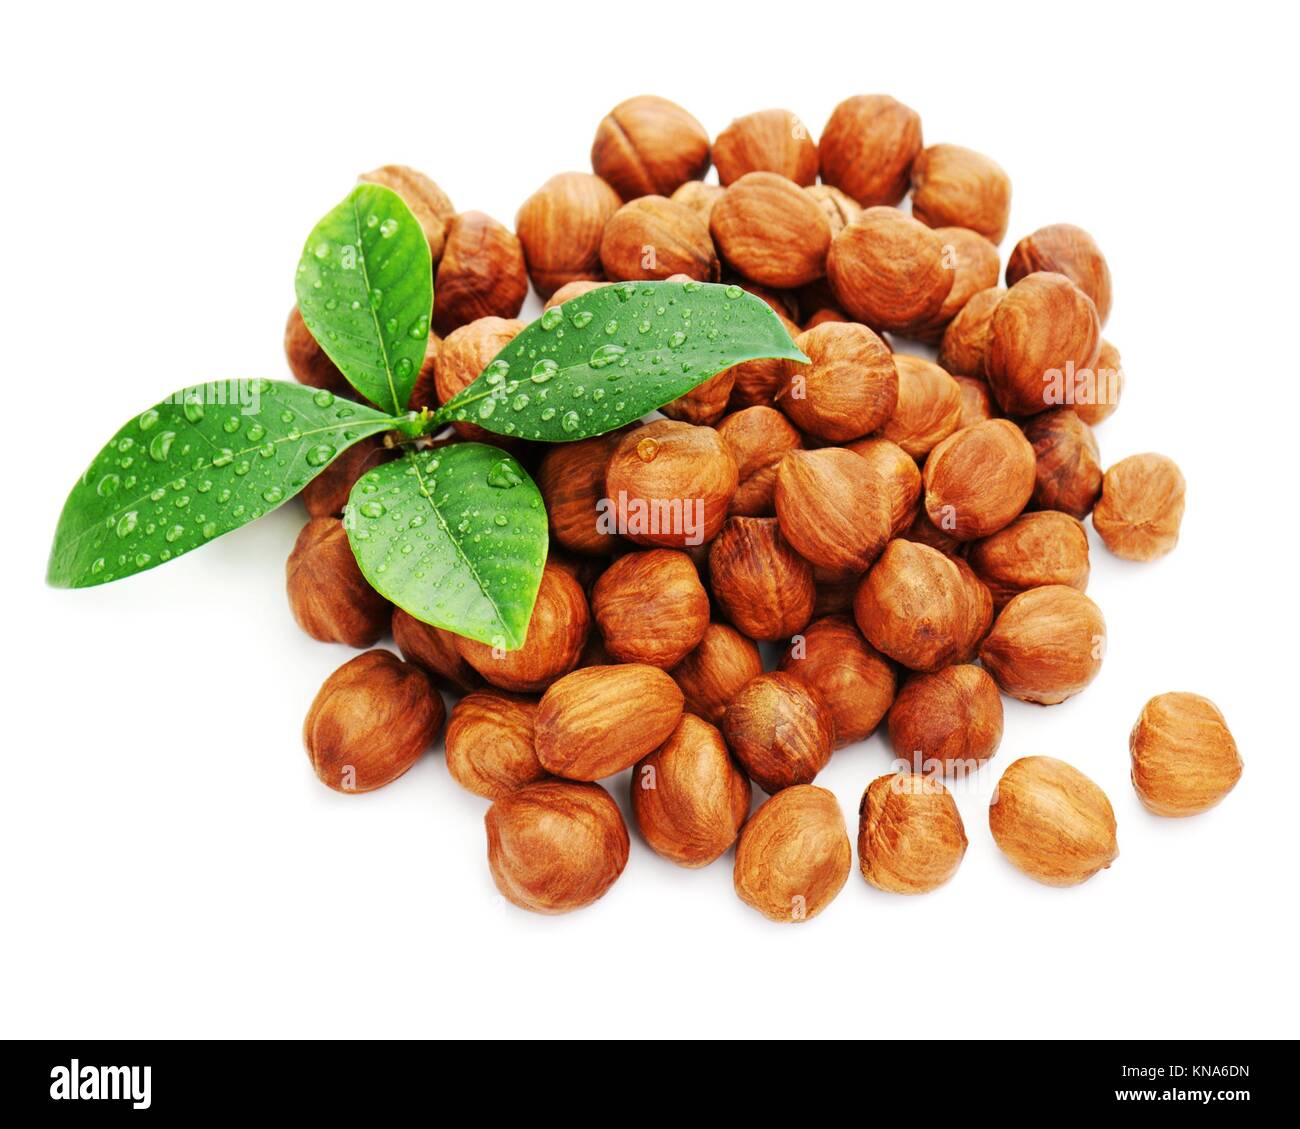 Heap of fresh shelled hazelnuts with green leaves isolated on white background. Closeup. Stock Photo